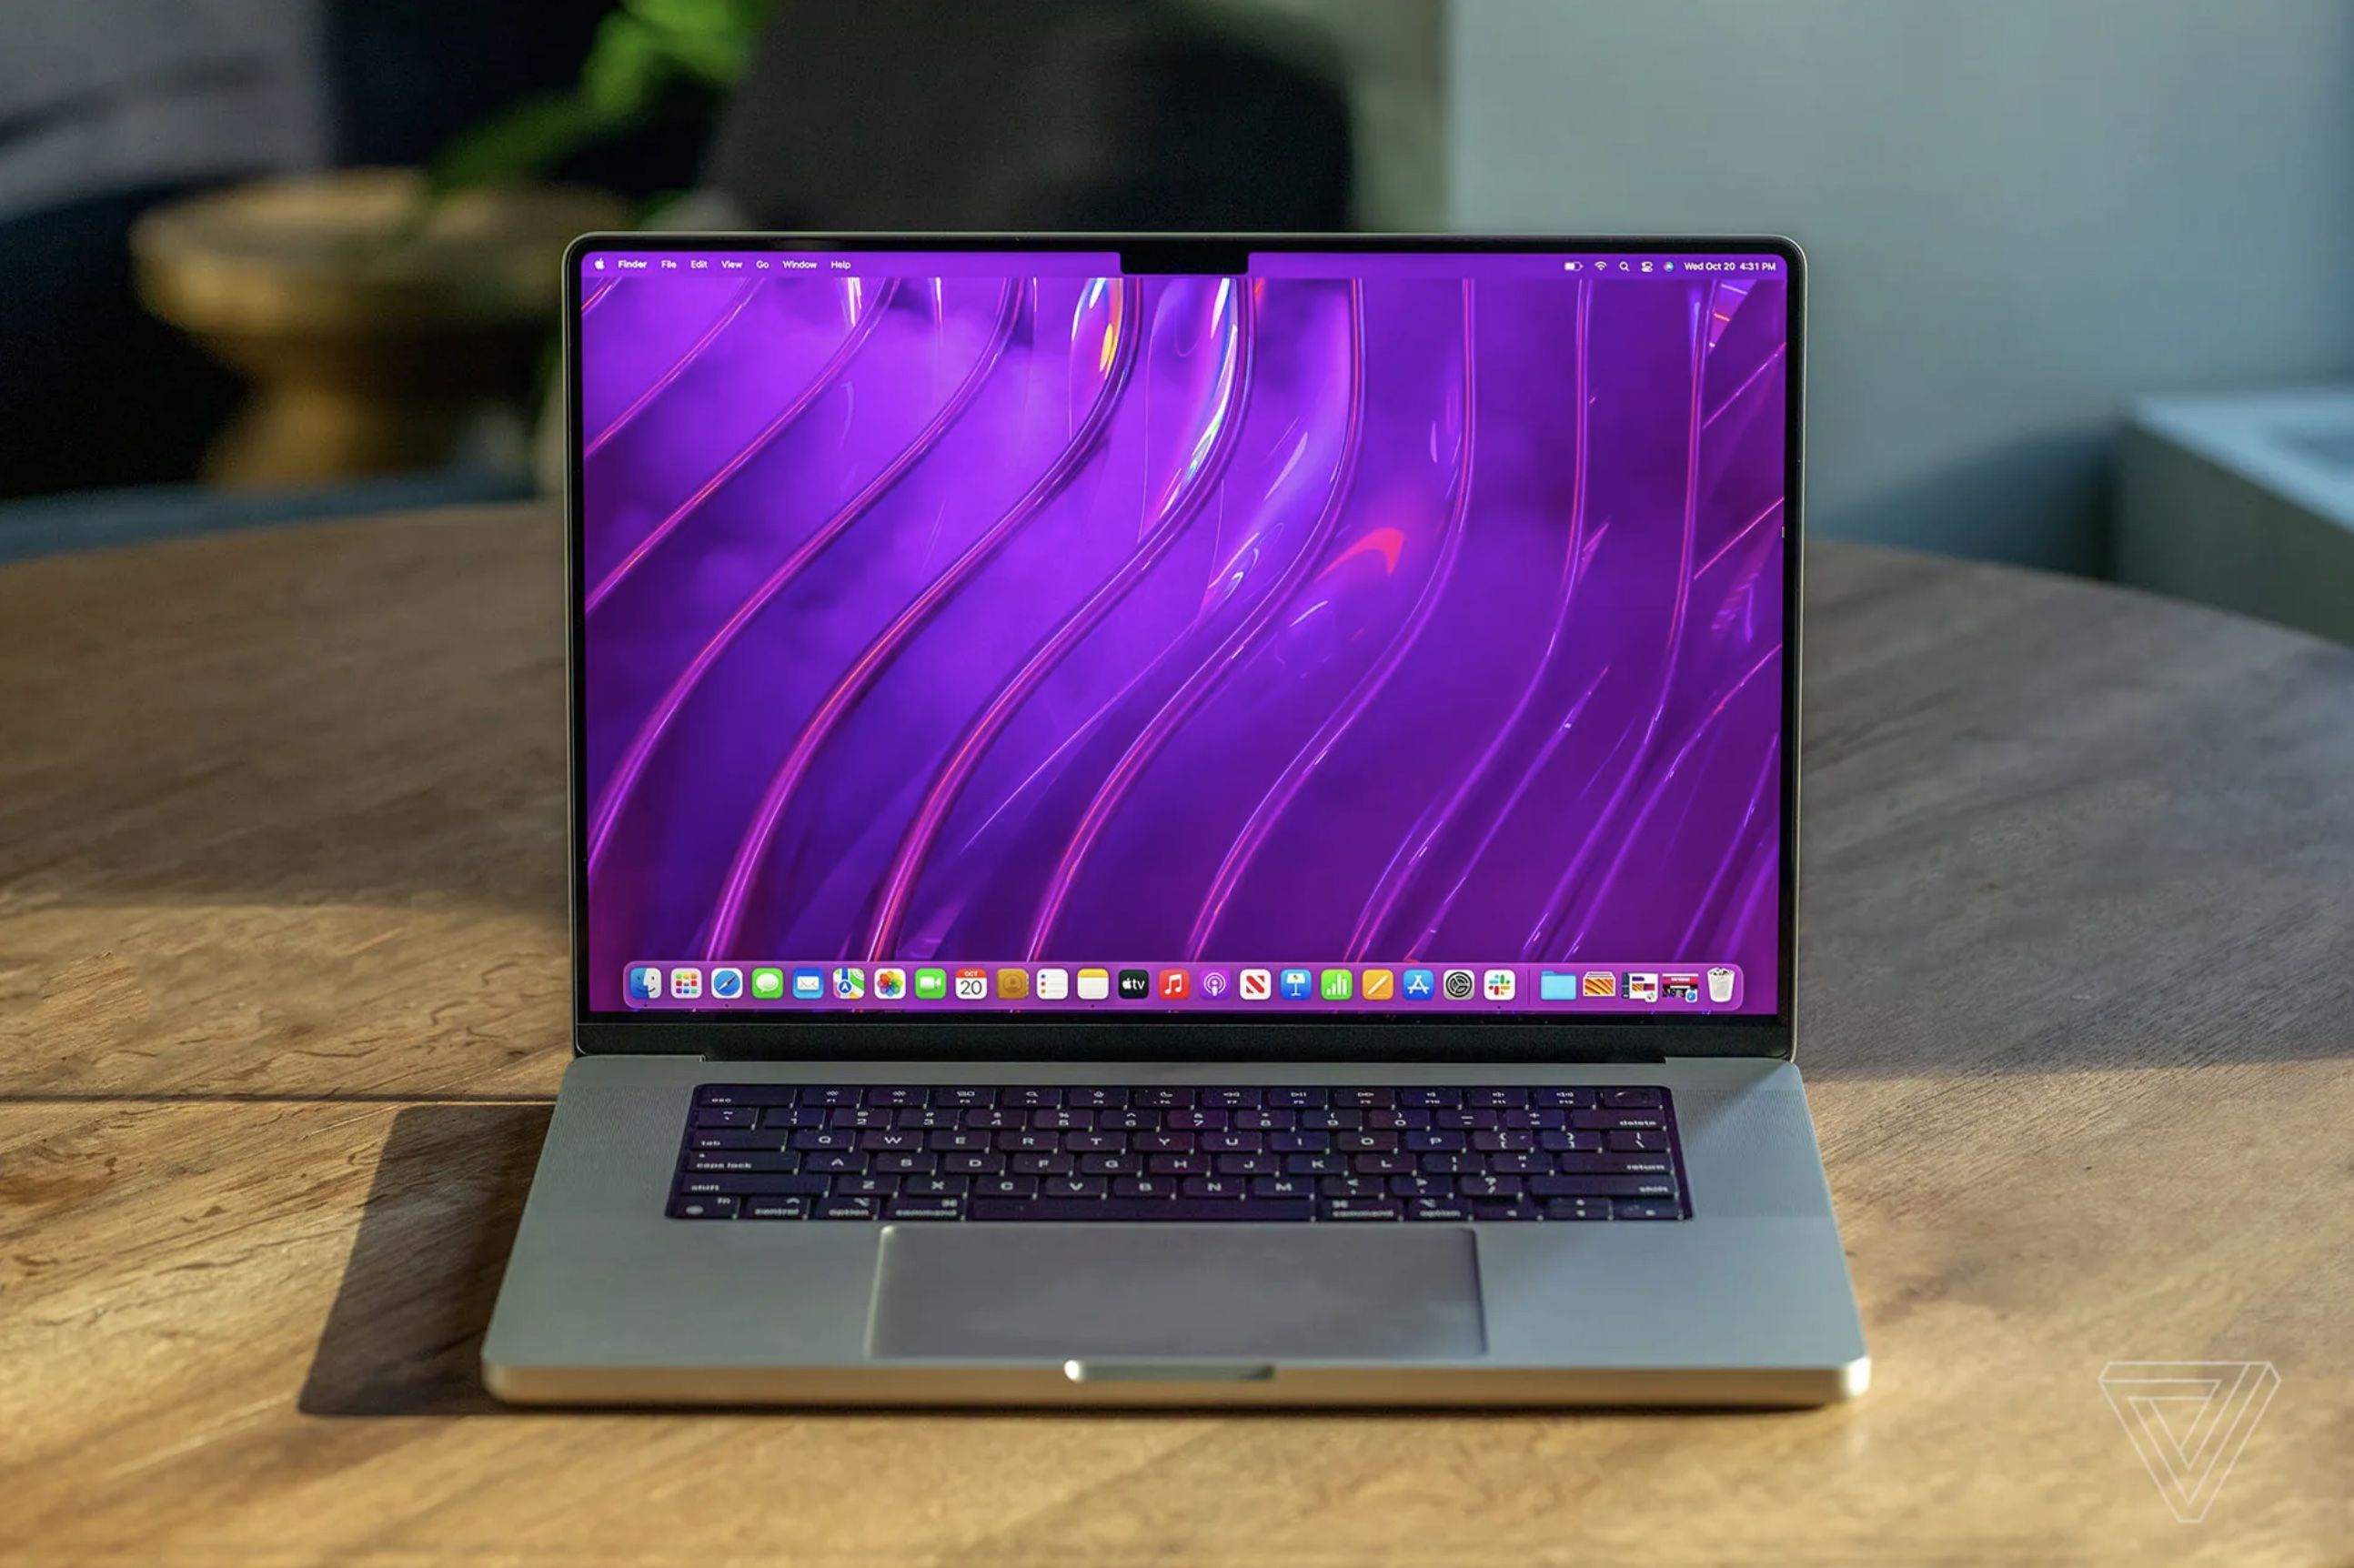 MacBook Pro Reviews: Fast Performance, Added Ports, and ProMotion Displays Check..